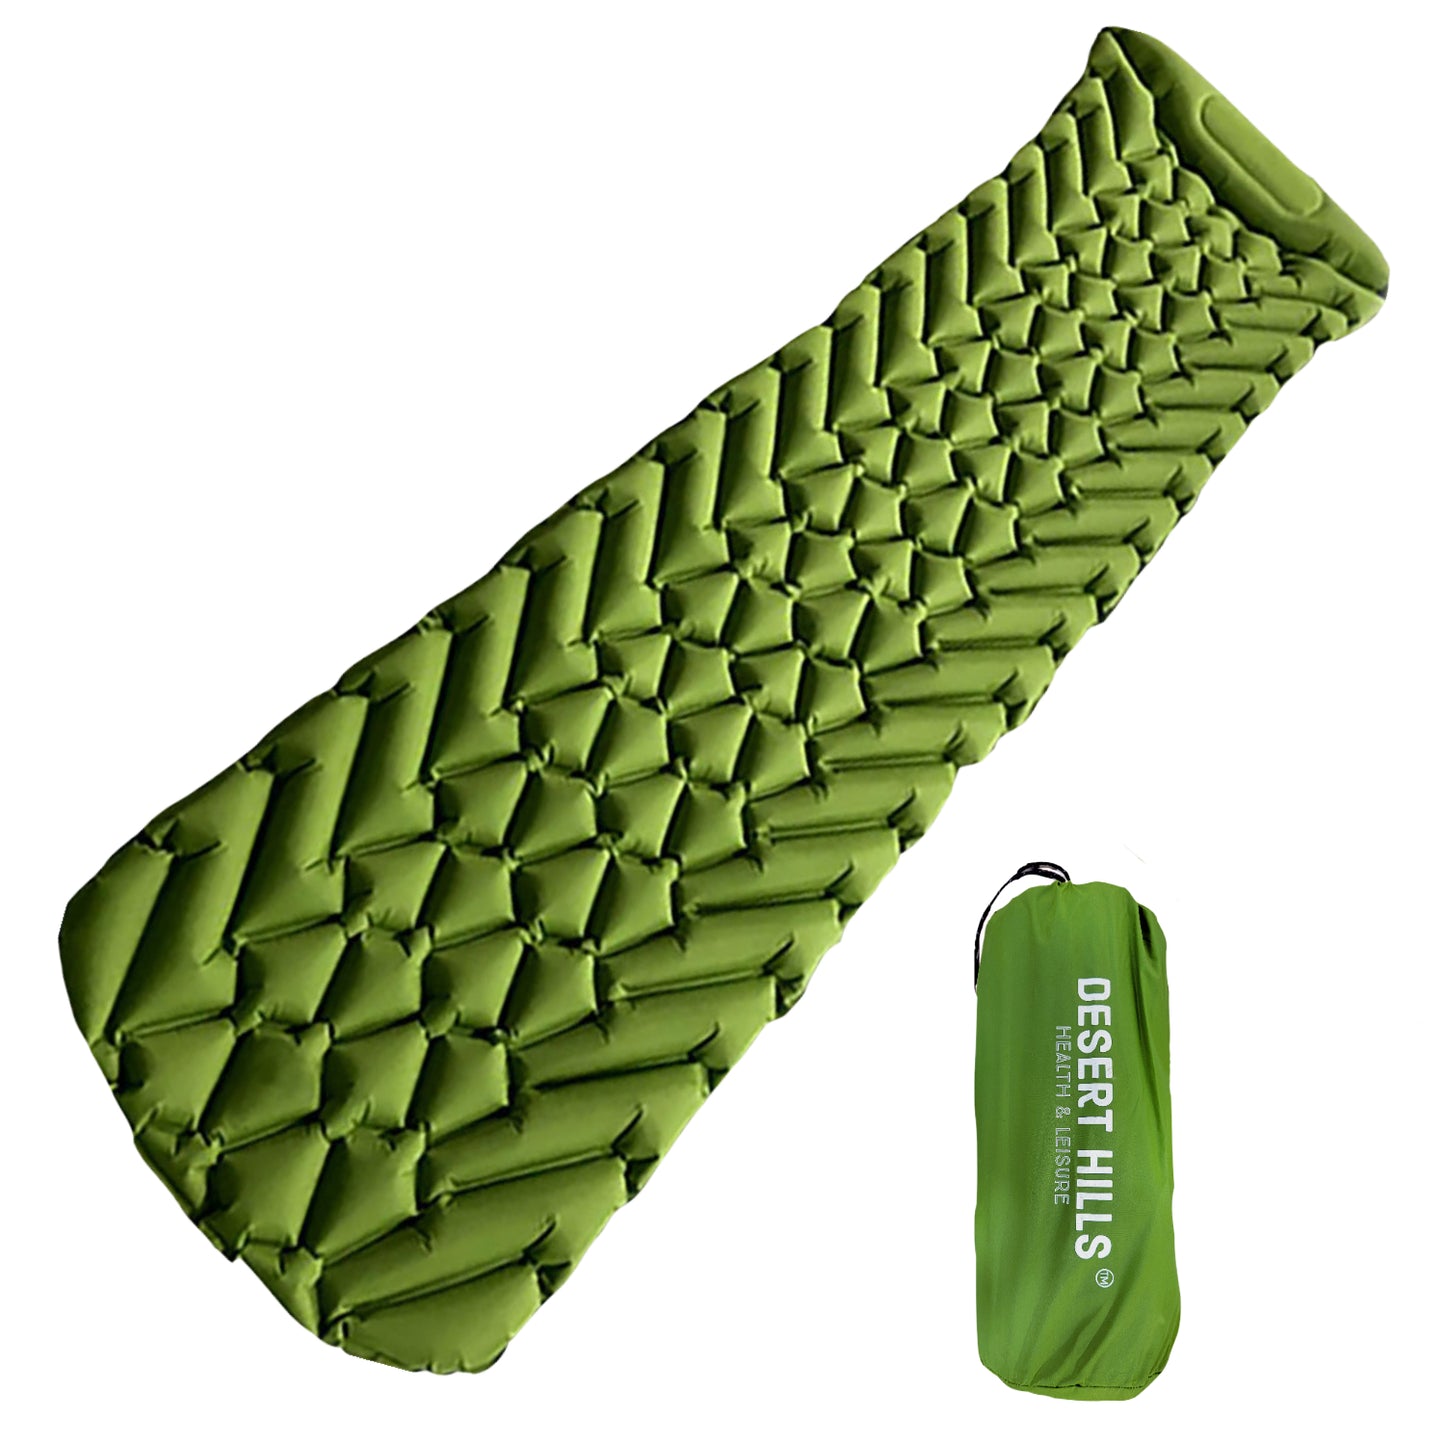 Sleep Pad with Built In Foot/Hand Pump Sleeping Pad Ultralight Compact Lightweight Waterproof Inflatable Camping Pad for Camping Hiking and Backpacking